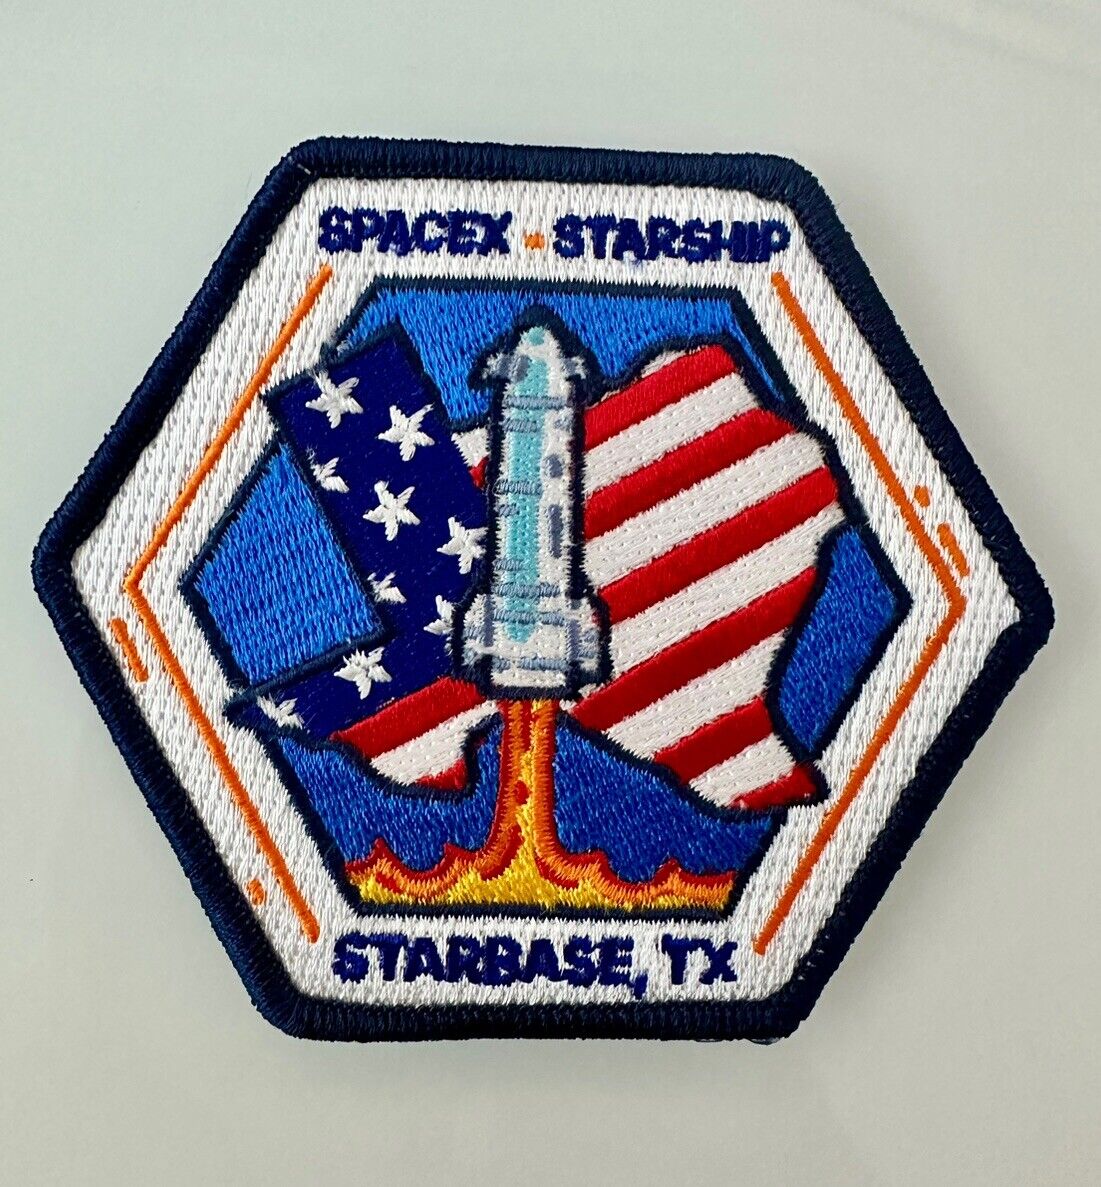 Official STARBASE TEXAS SPACE X STARSHIP PROGRAM FLIGHT MISSION PATCH 3” USA